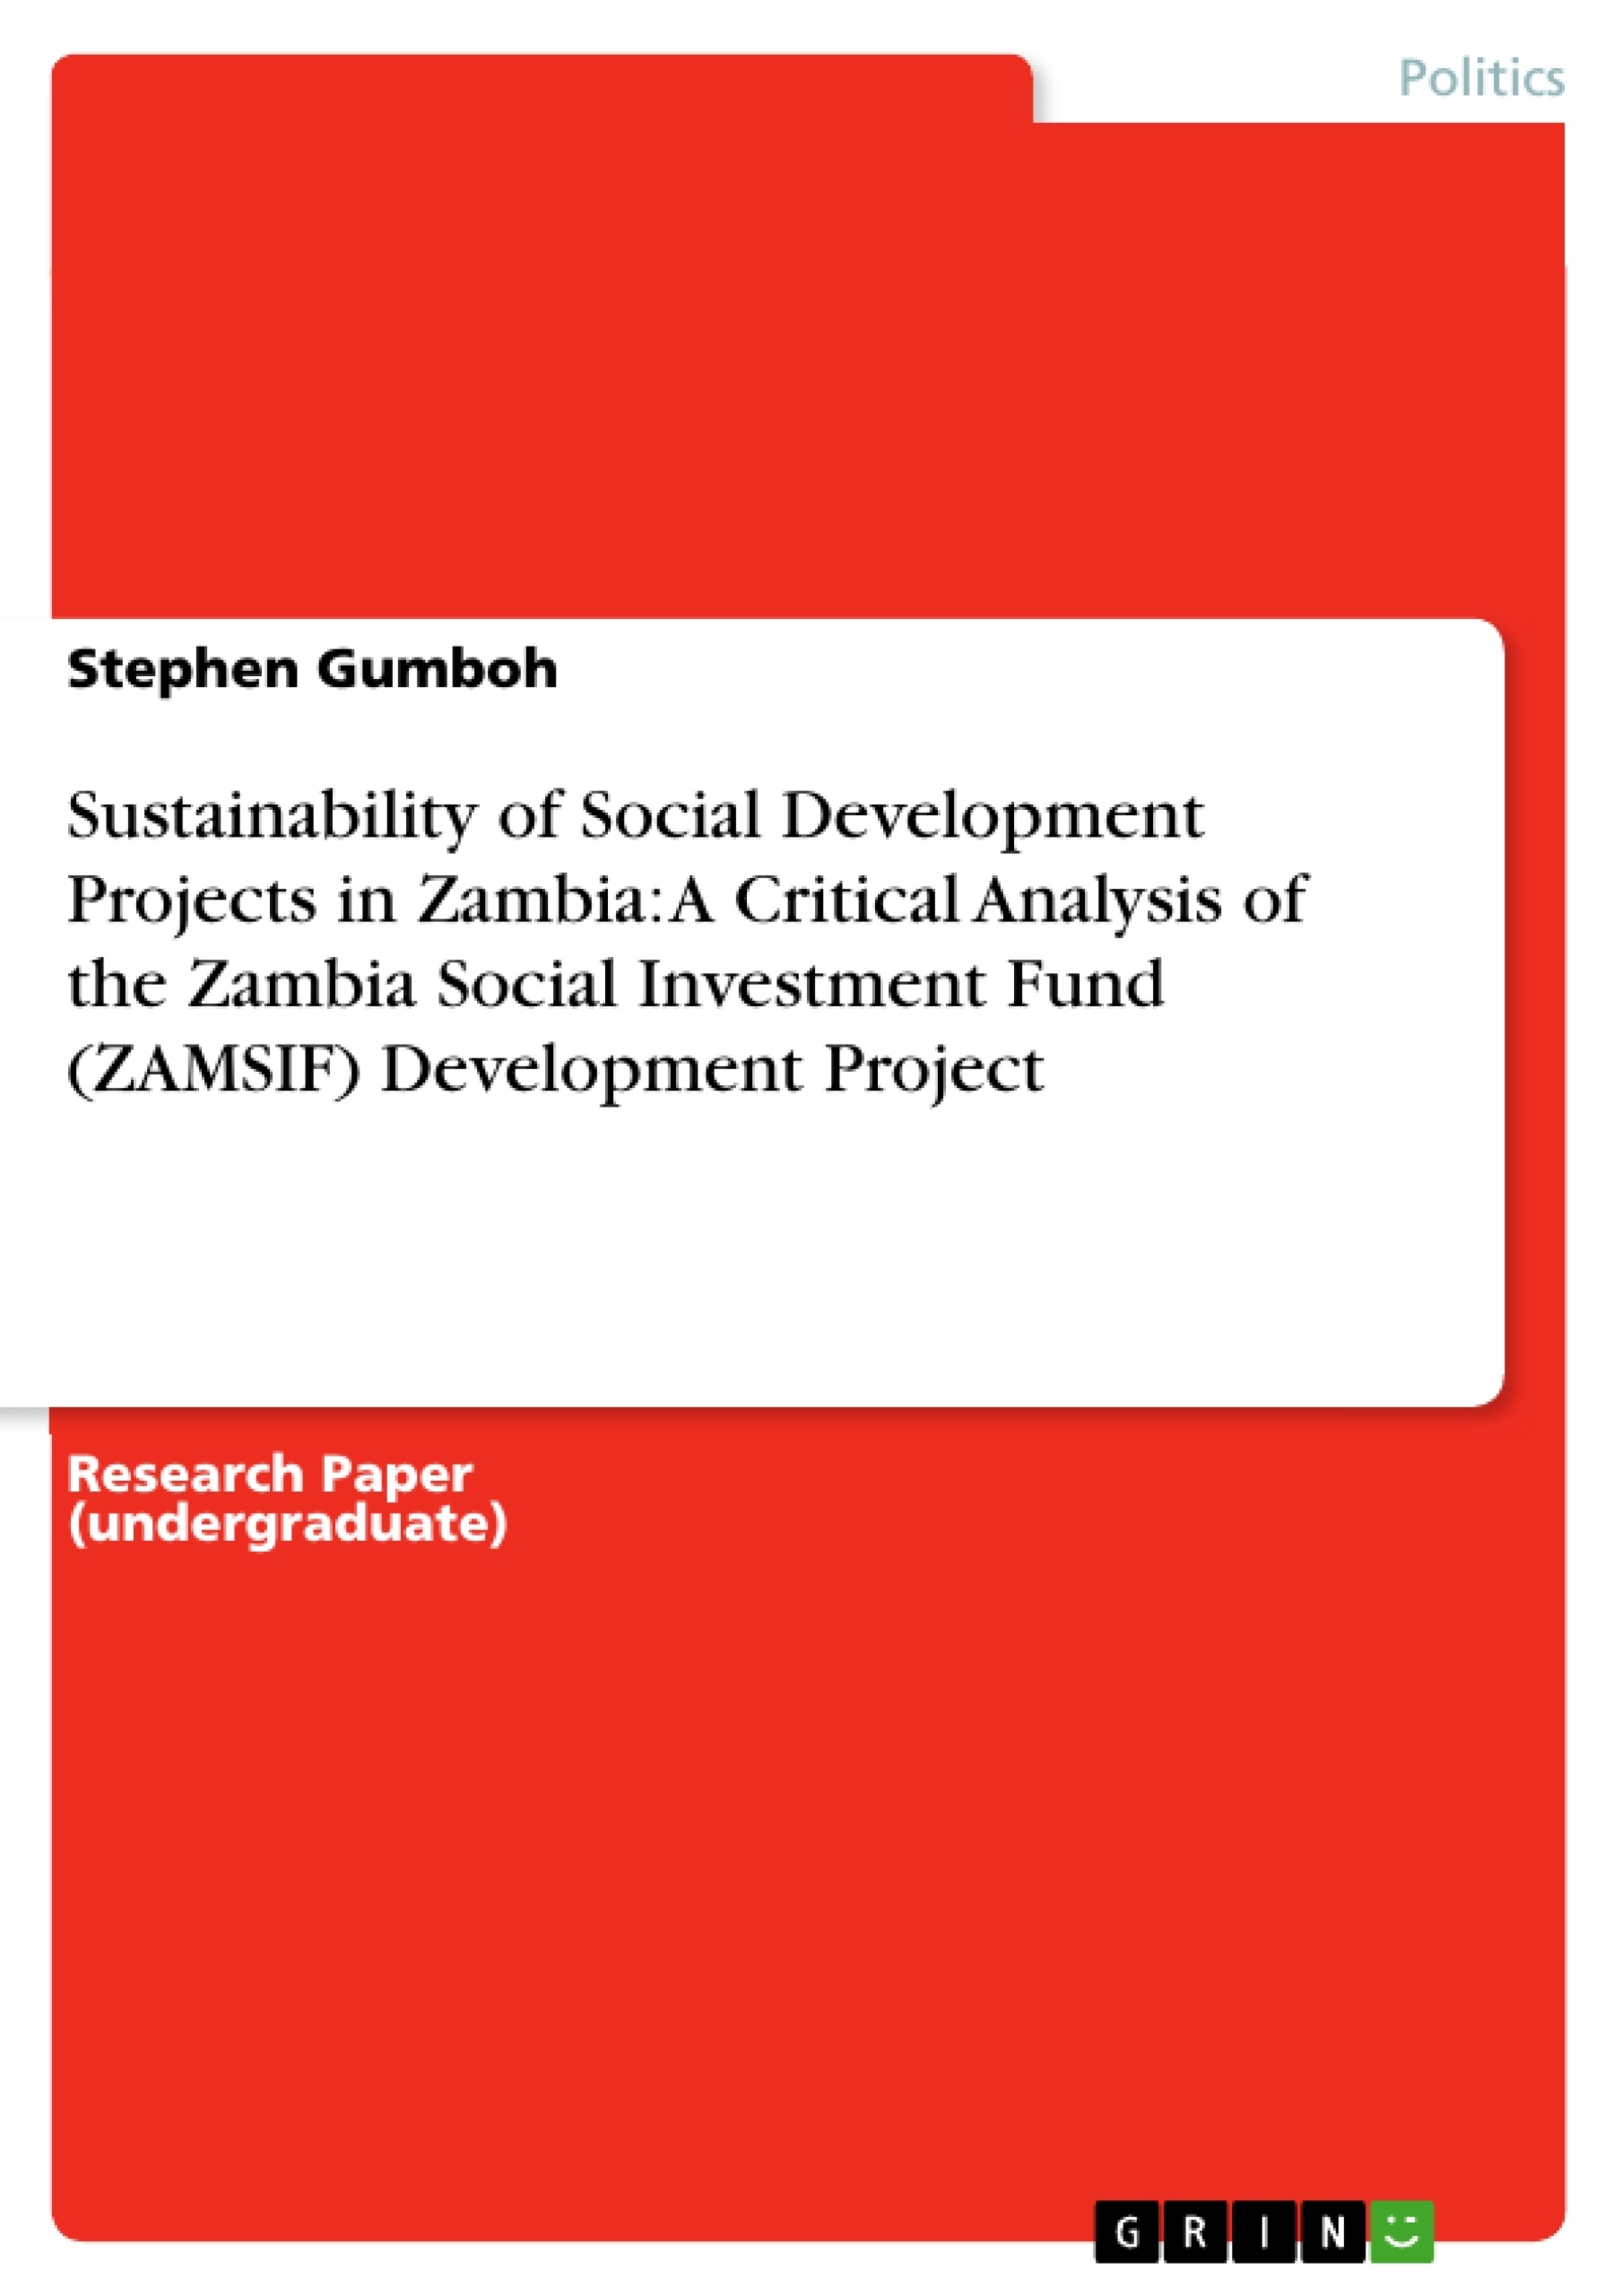 Title: Sustainability of Social Development Projects in Zambia:  A Critical Analysis of the Zambia Social Investment Fund (ZAMSIF) Development Project